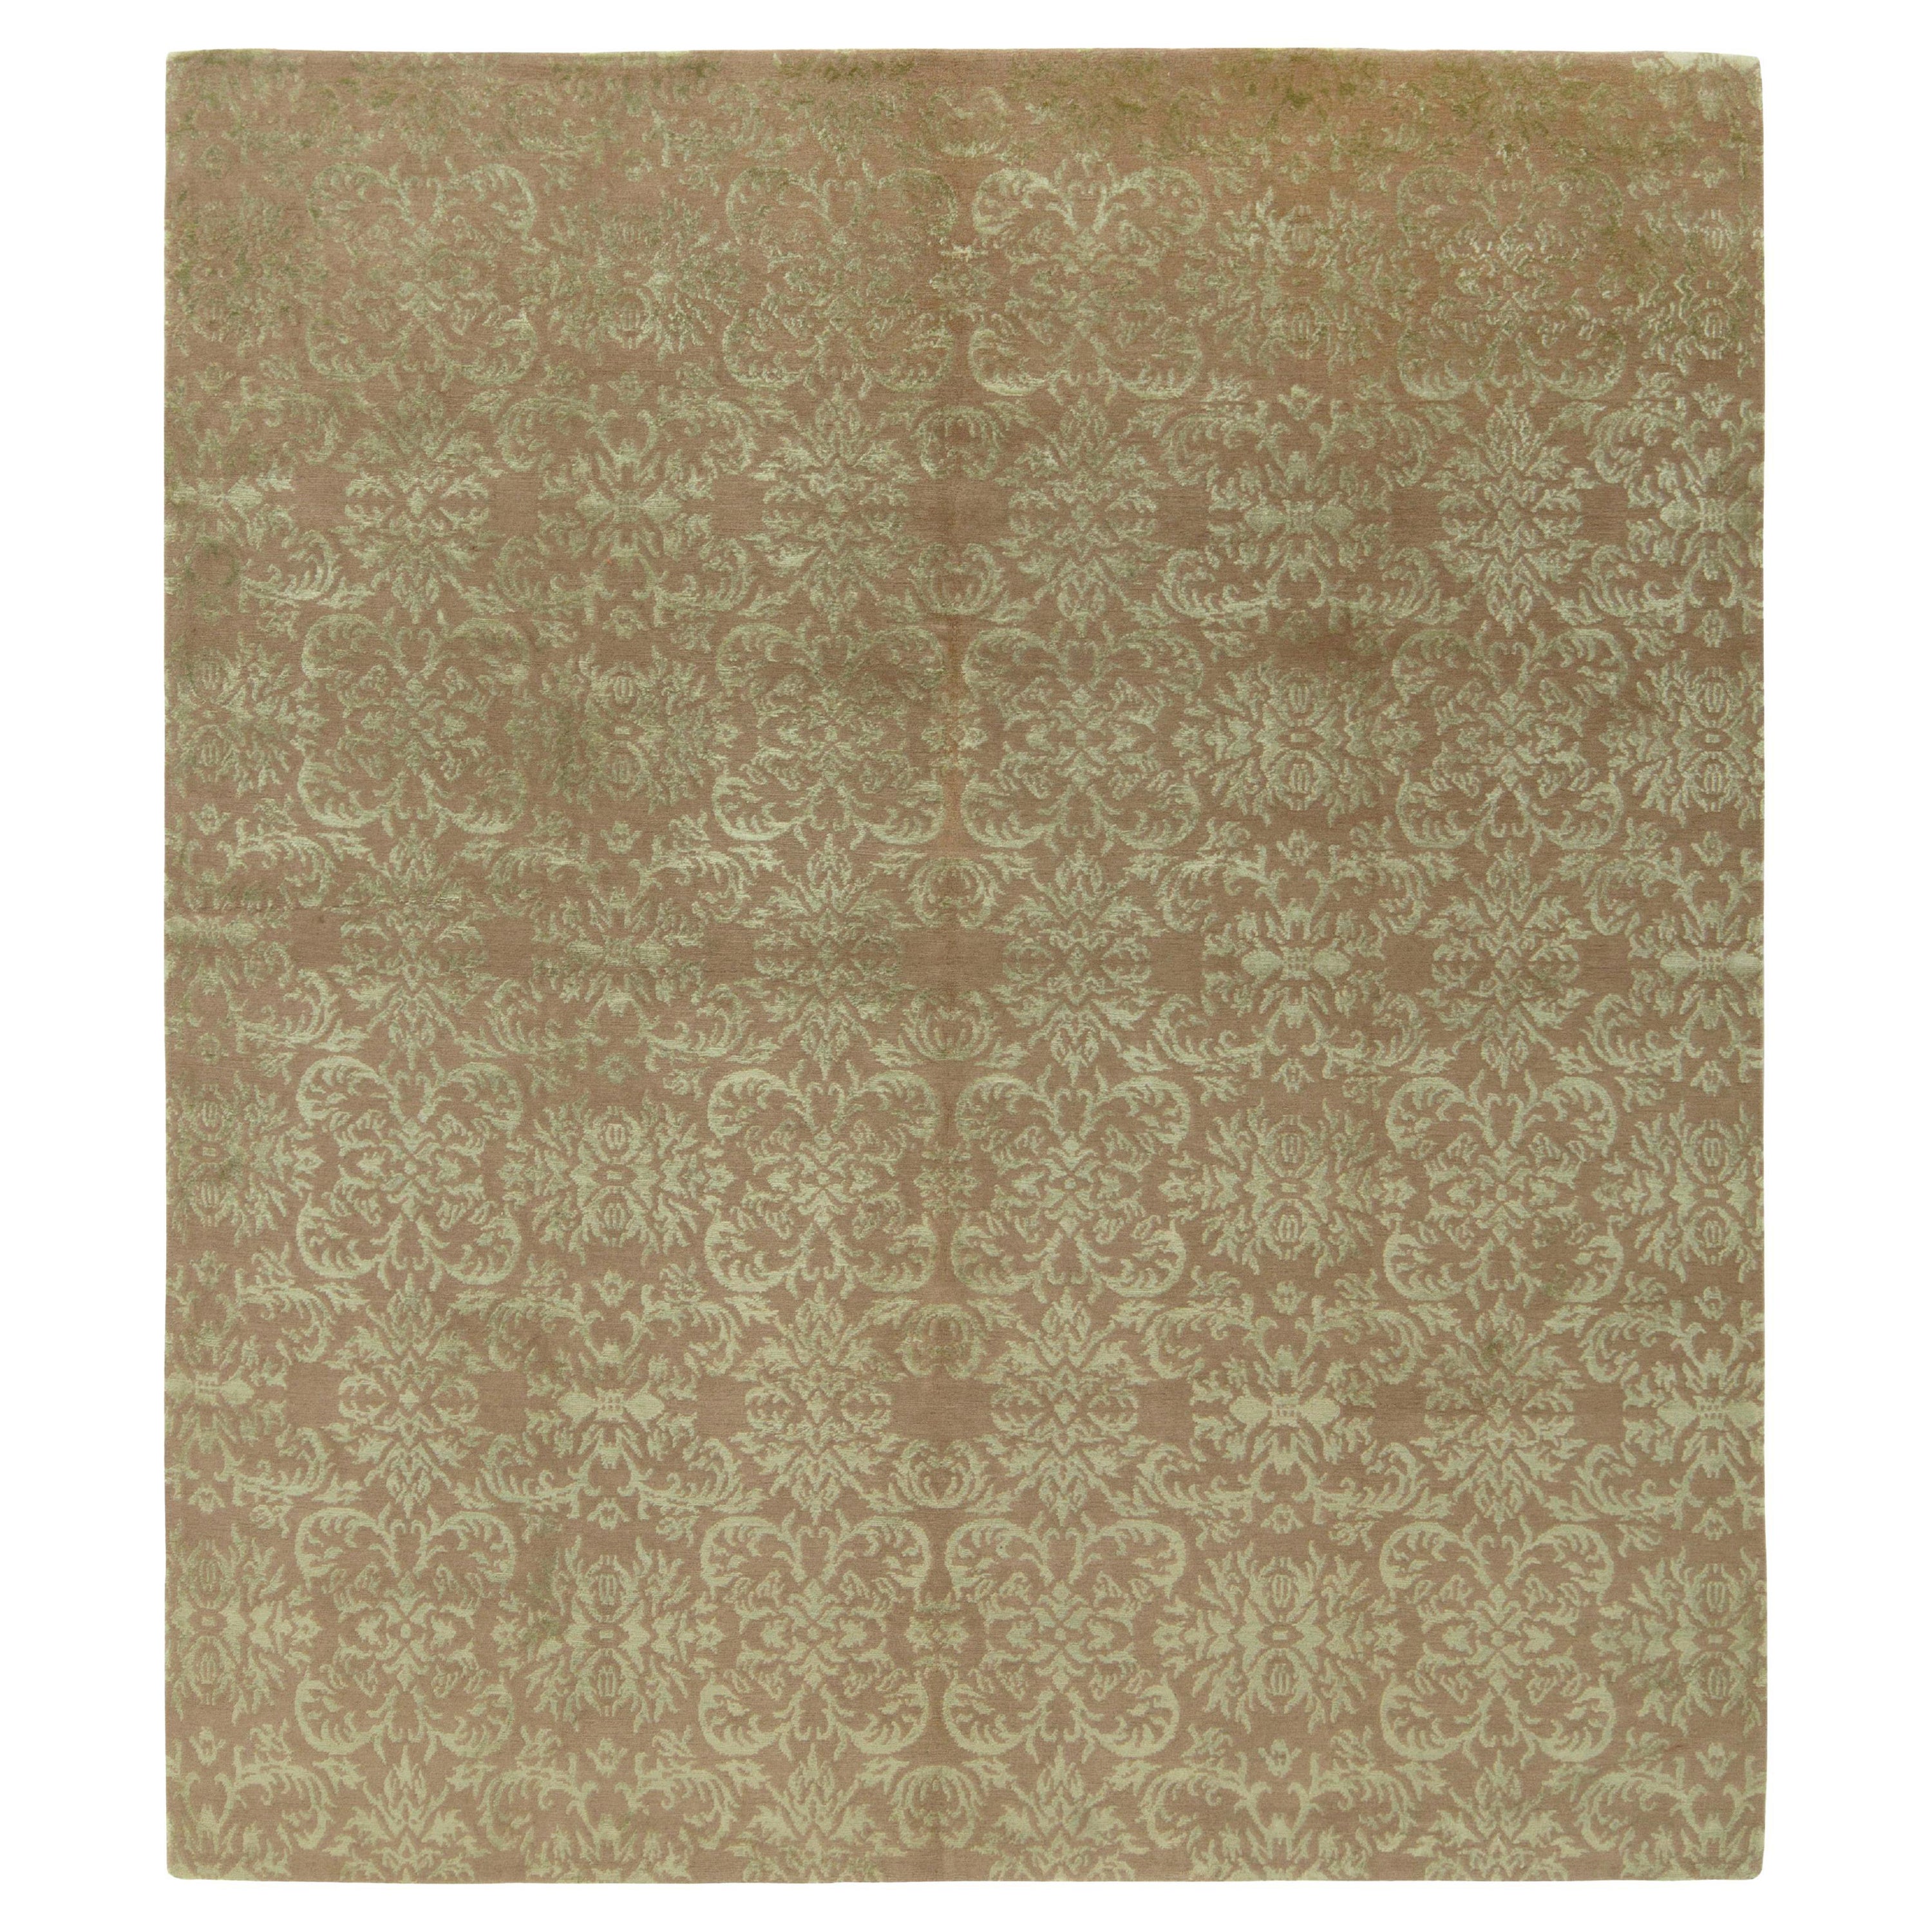 Rug & Kilim Handknotted Classic European Style Rug in Beige Brown Floral Pattern For Sale